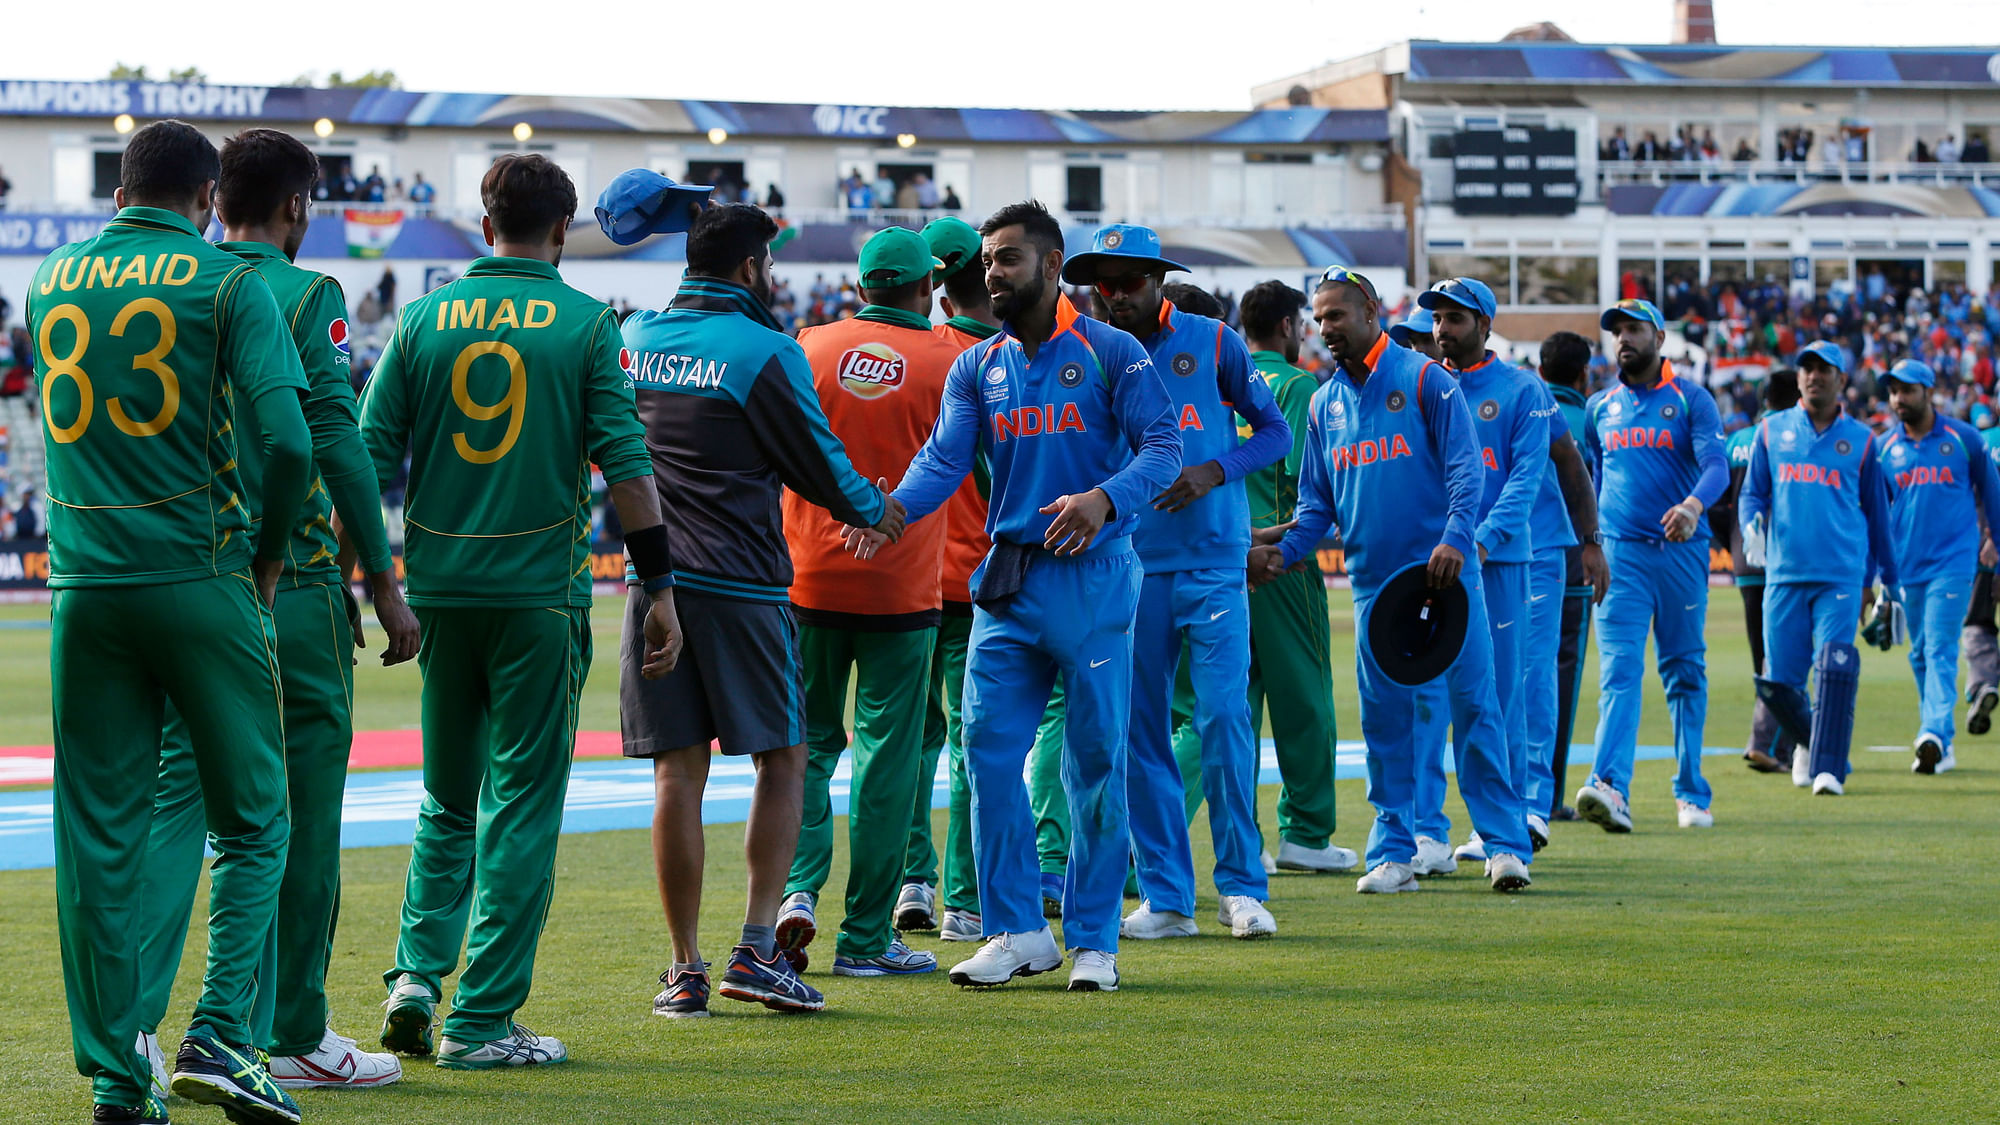 The India and Pakistan players shake hands after their Champions Trophy group match on 4 June. (Photo: AP)